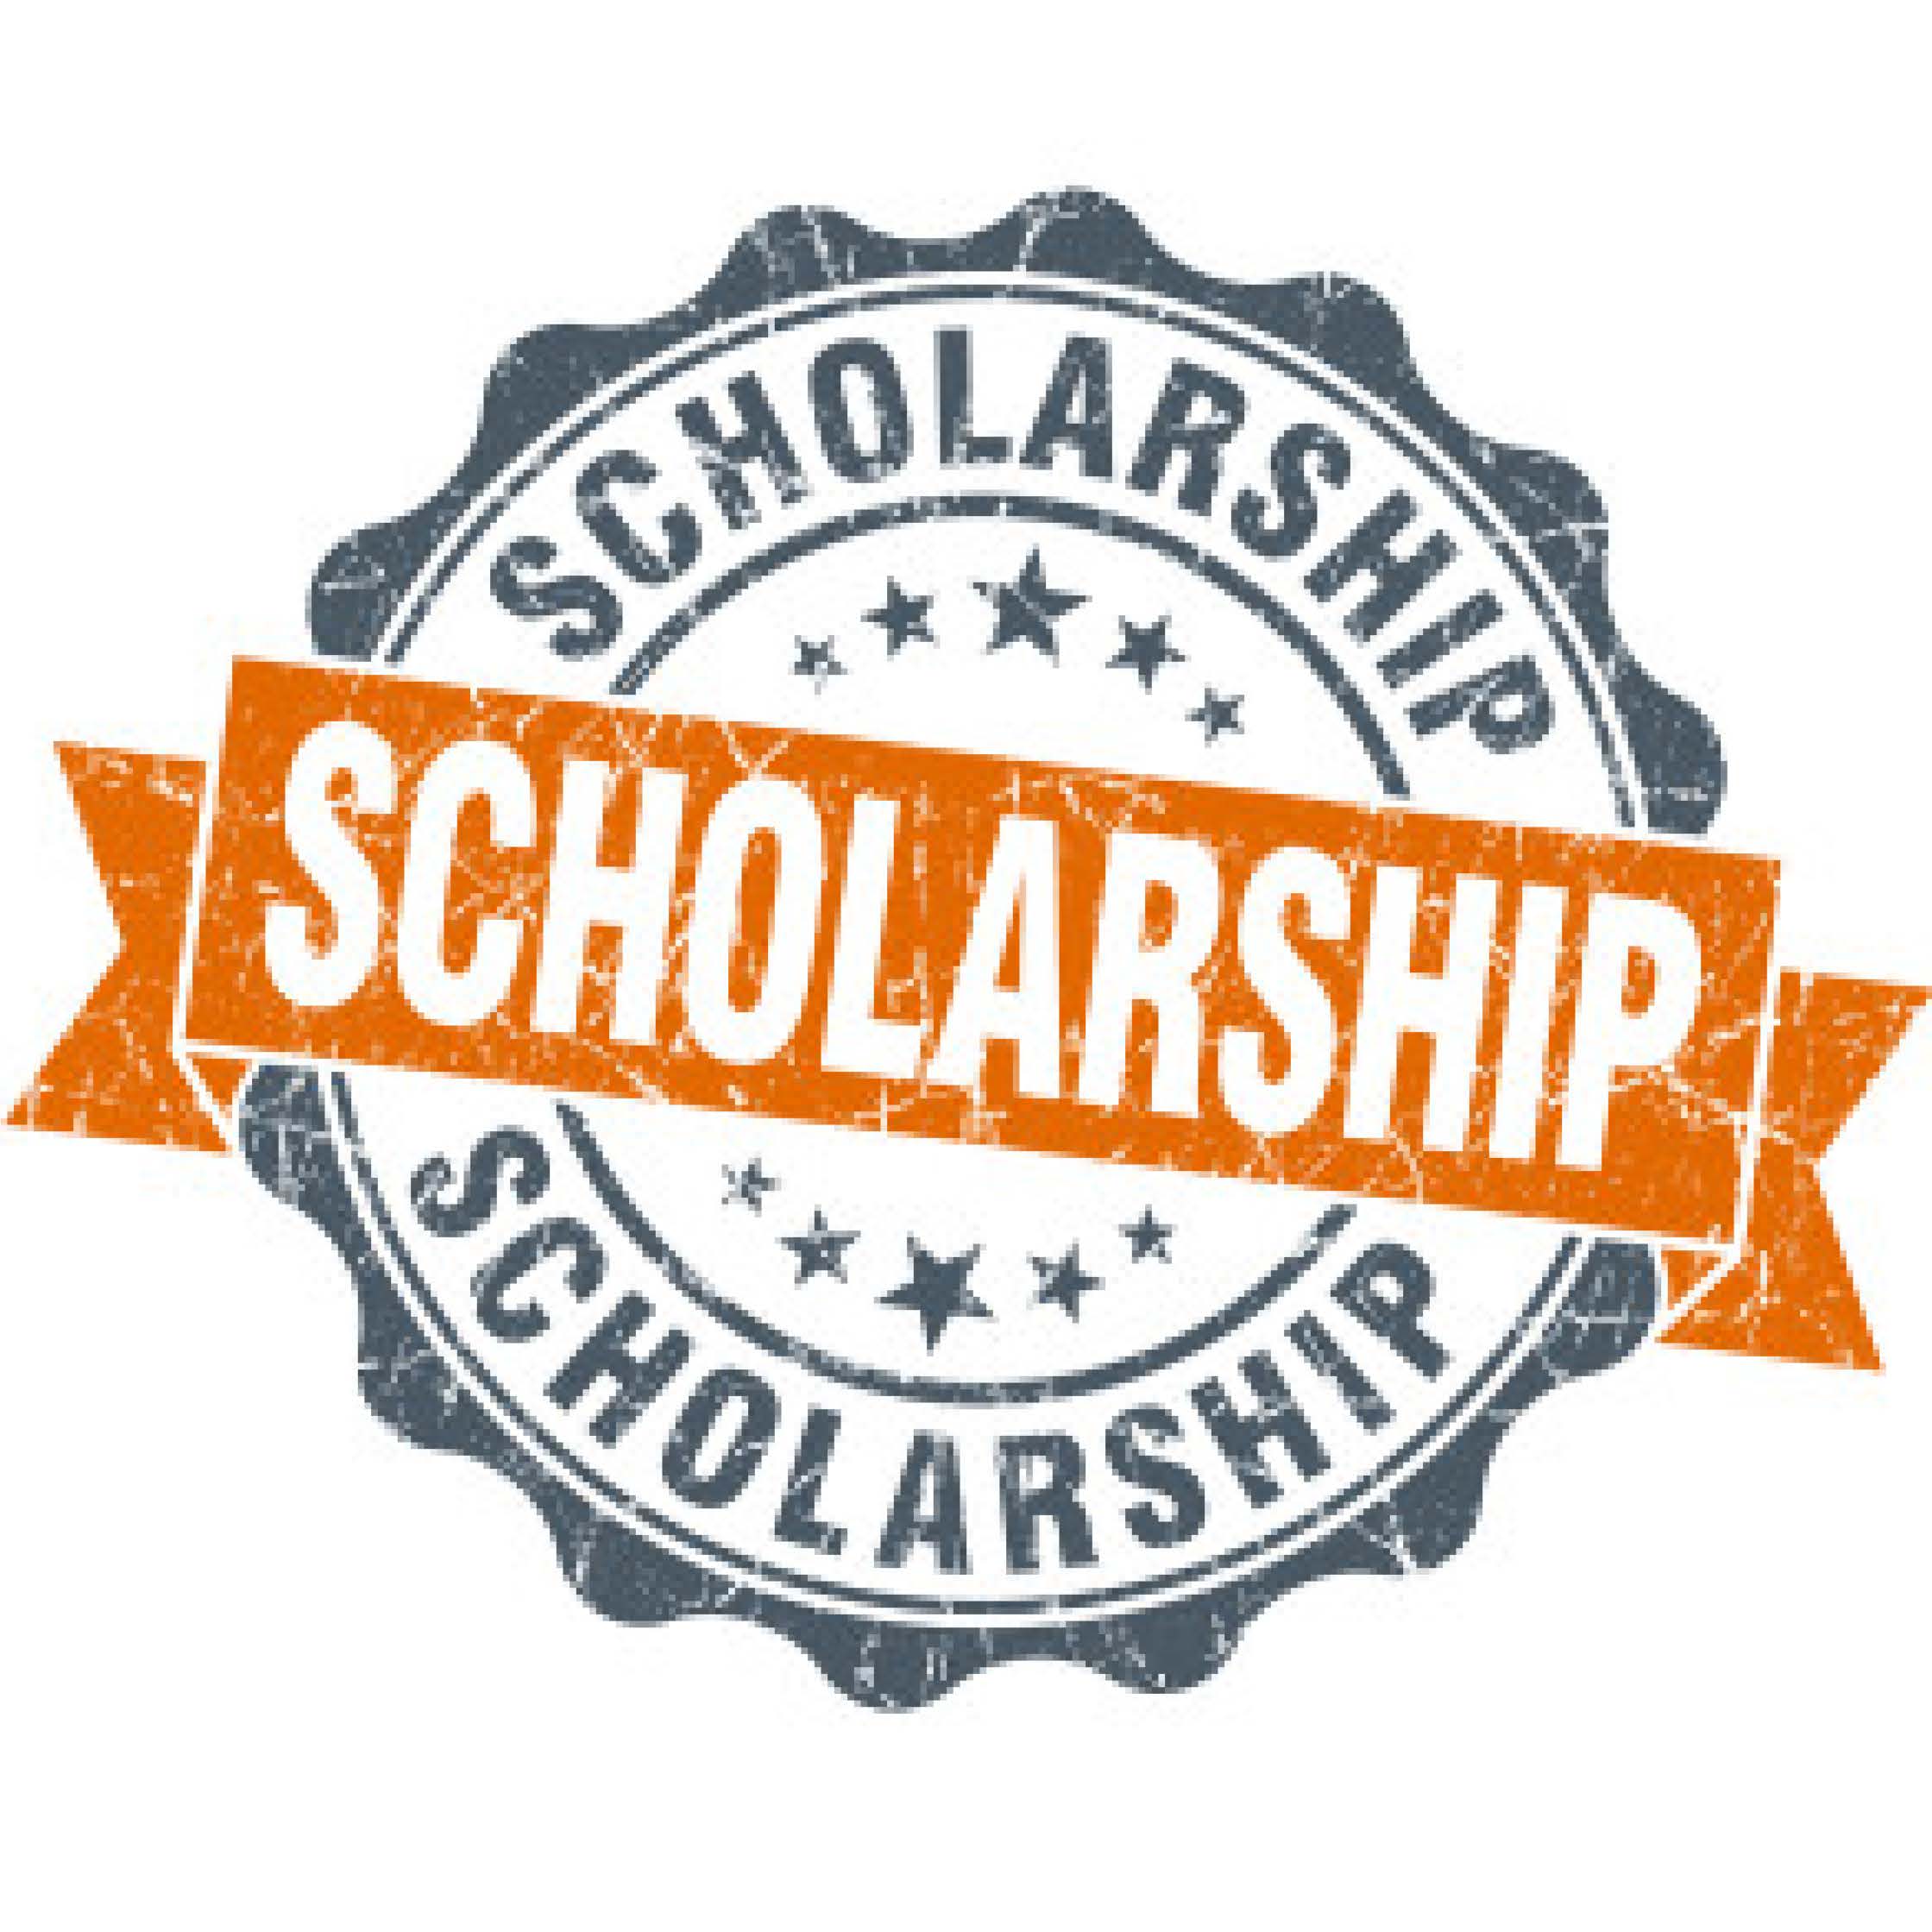 You are currently viewing 2019 Grant Allen Scholarship applications now being accepted